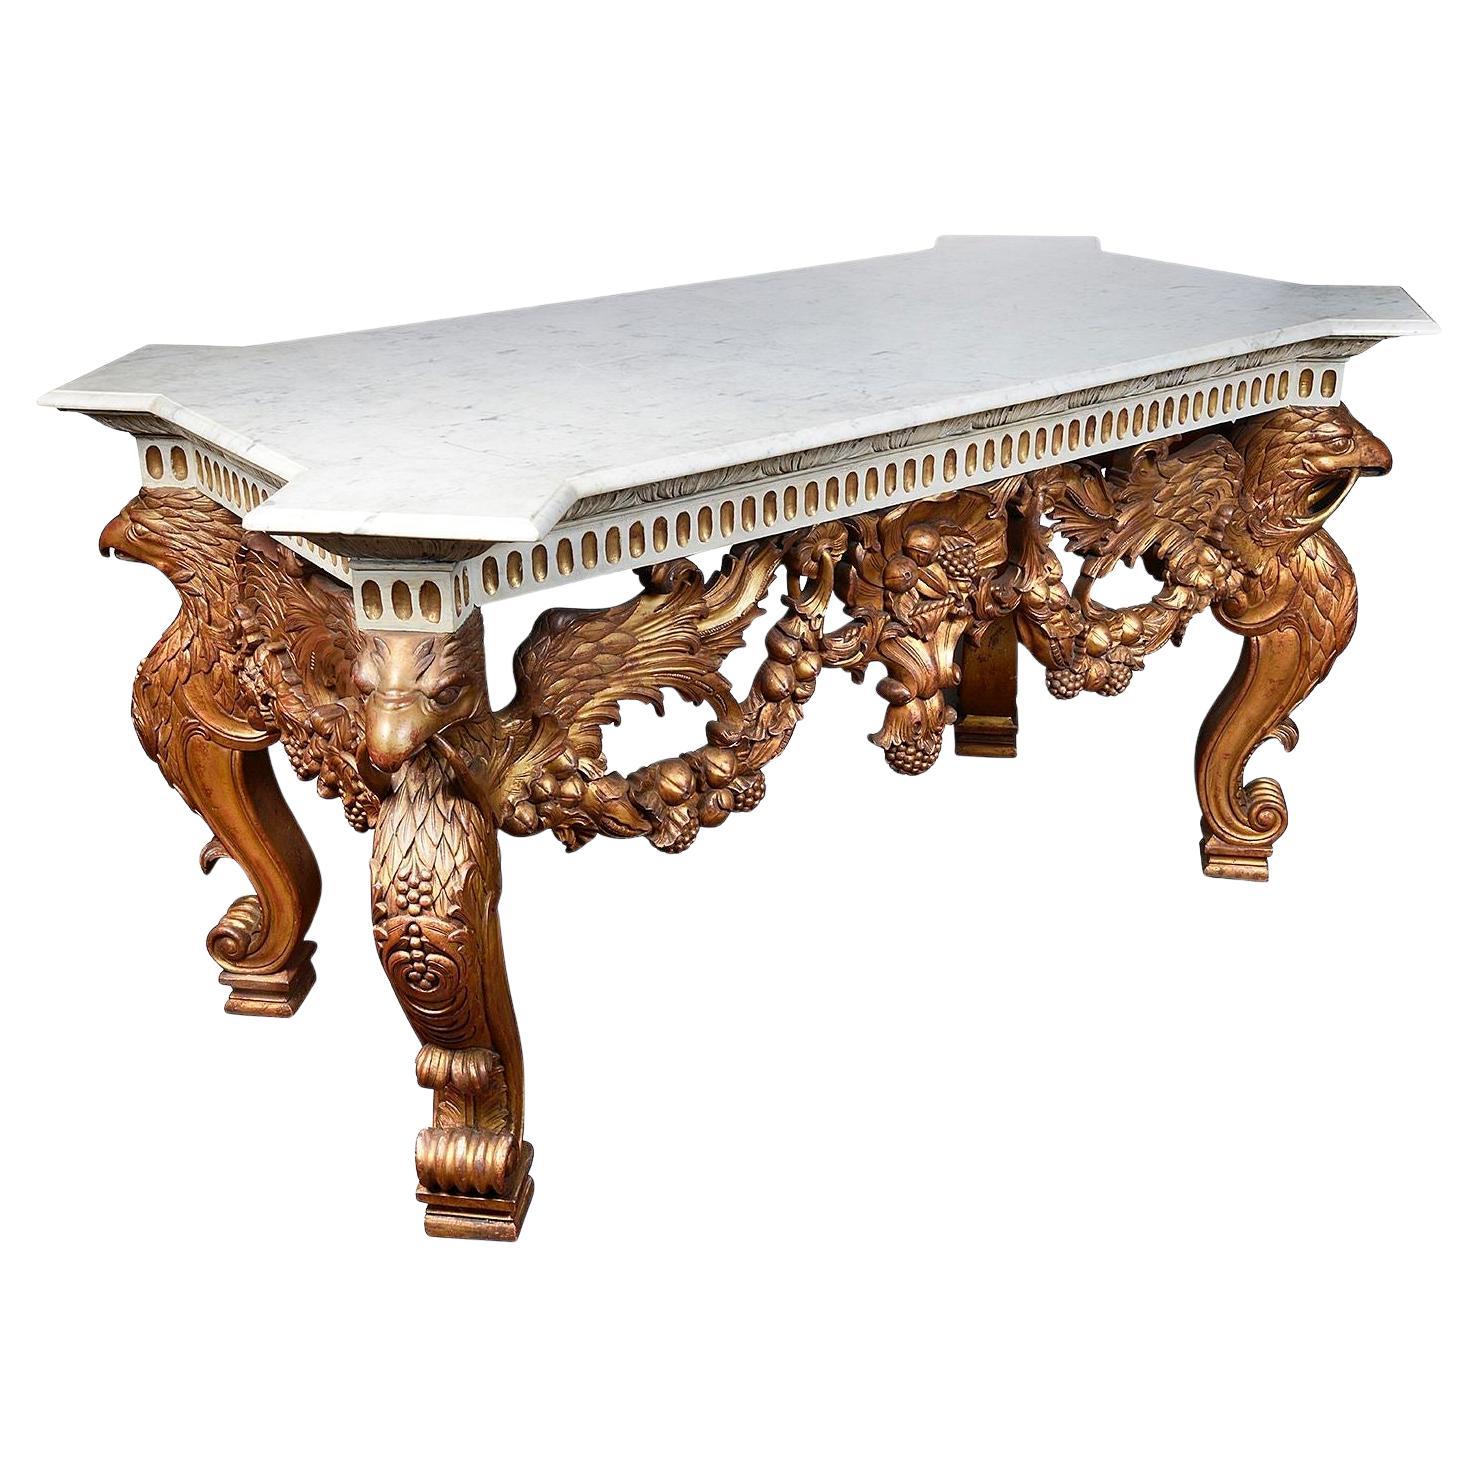 18th century style Adam influenced console table.